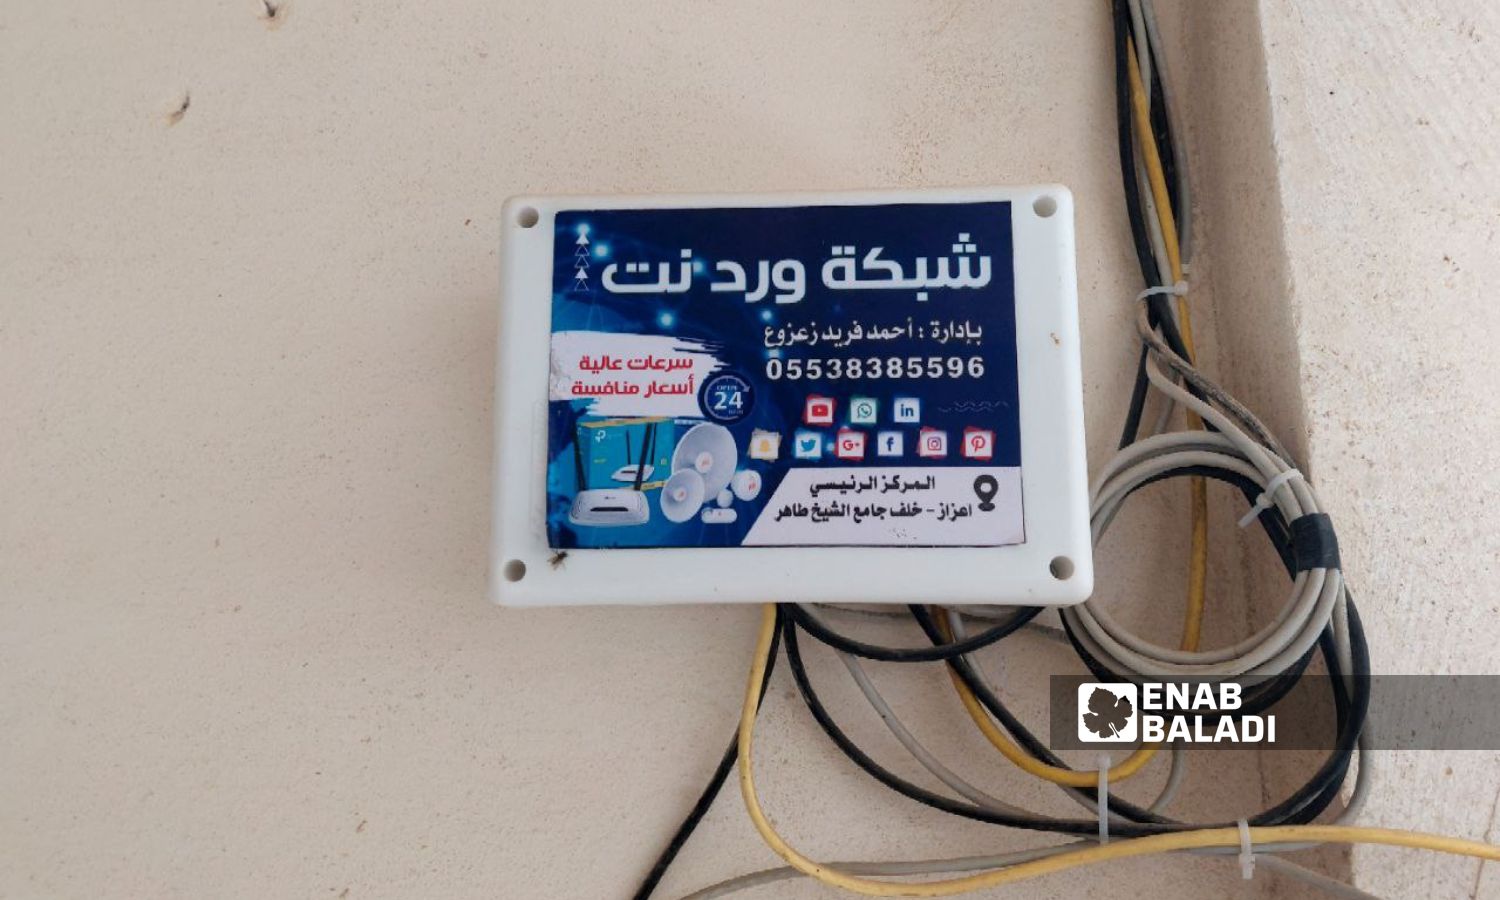 A modem device that receives and distributes internet in a house in the northern city of Azaz, Aleppo - December 8, 2023 (Enab Baladi/Dayan Junpaz)